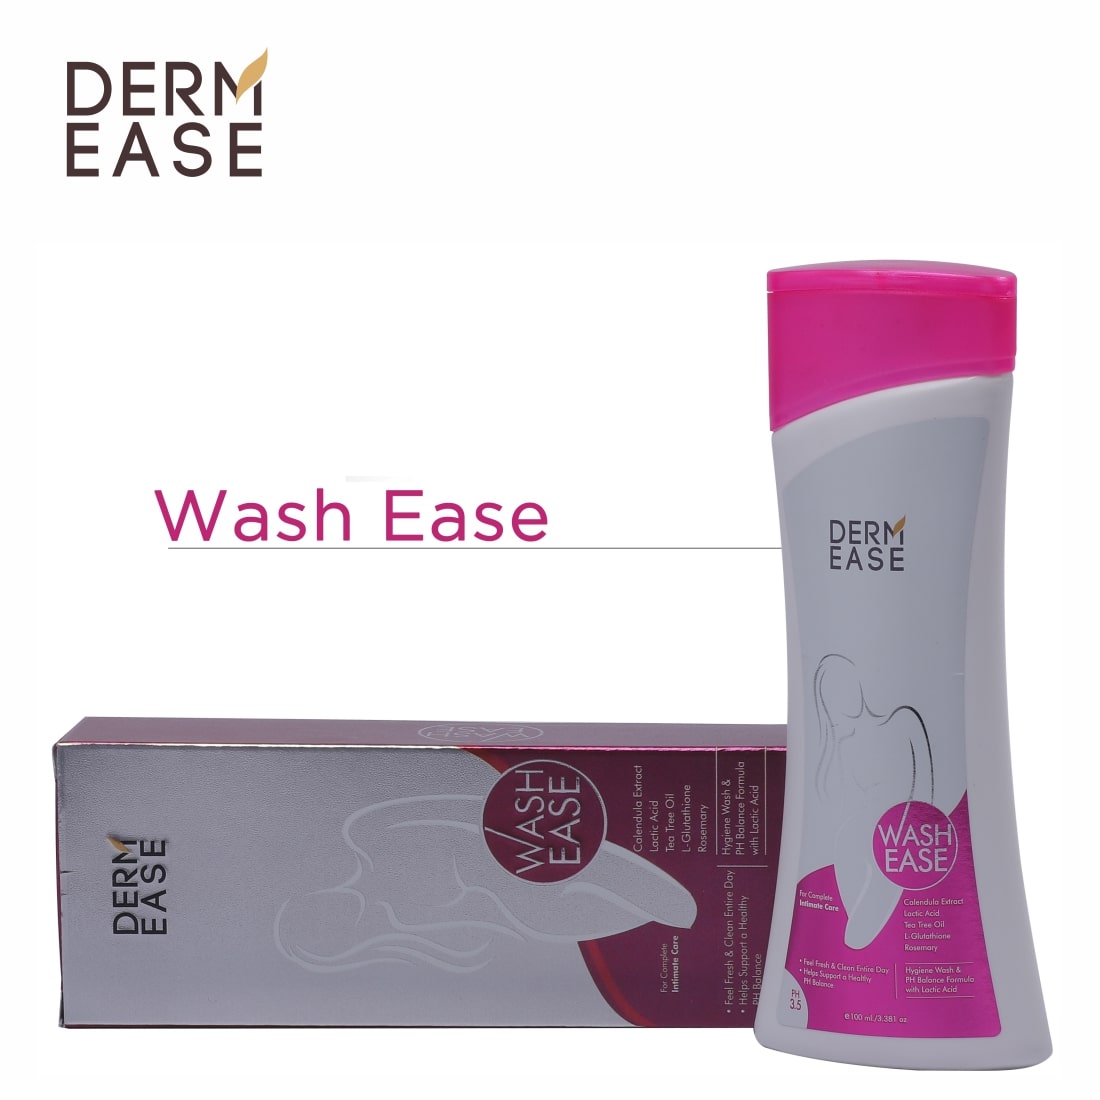 DERM EASE Wash Ease Intimate Cream